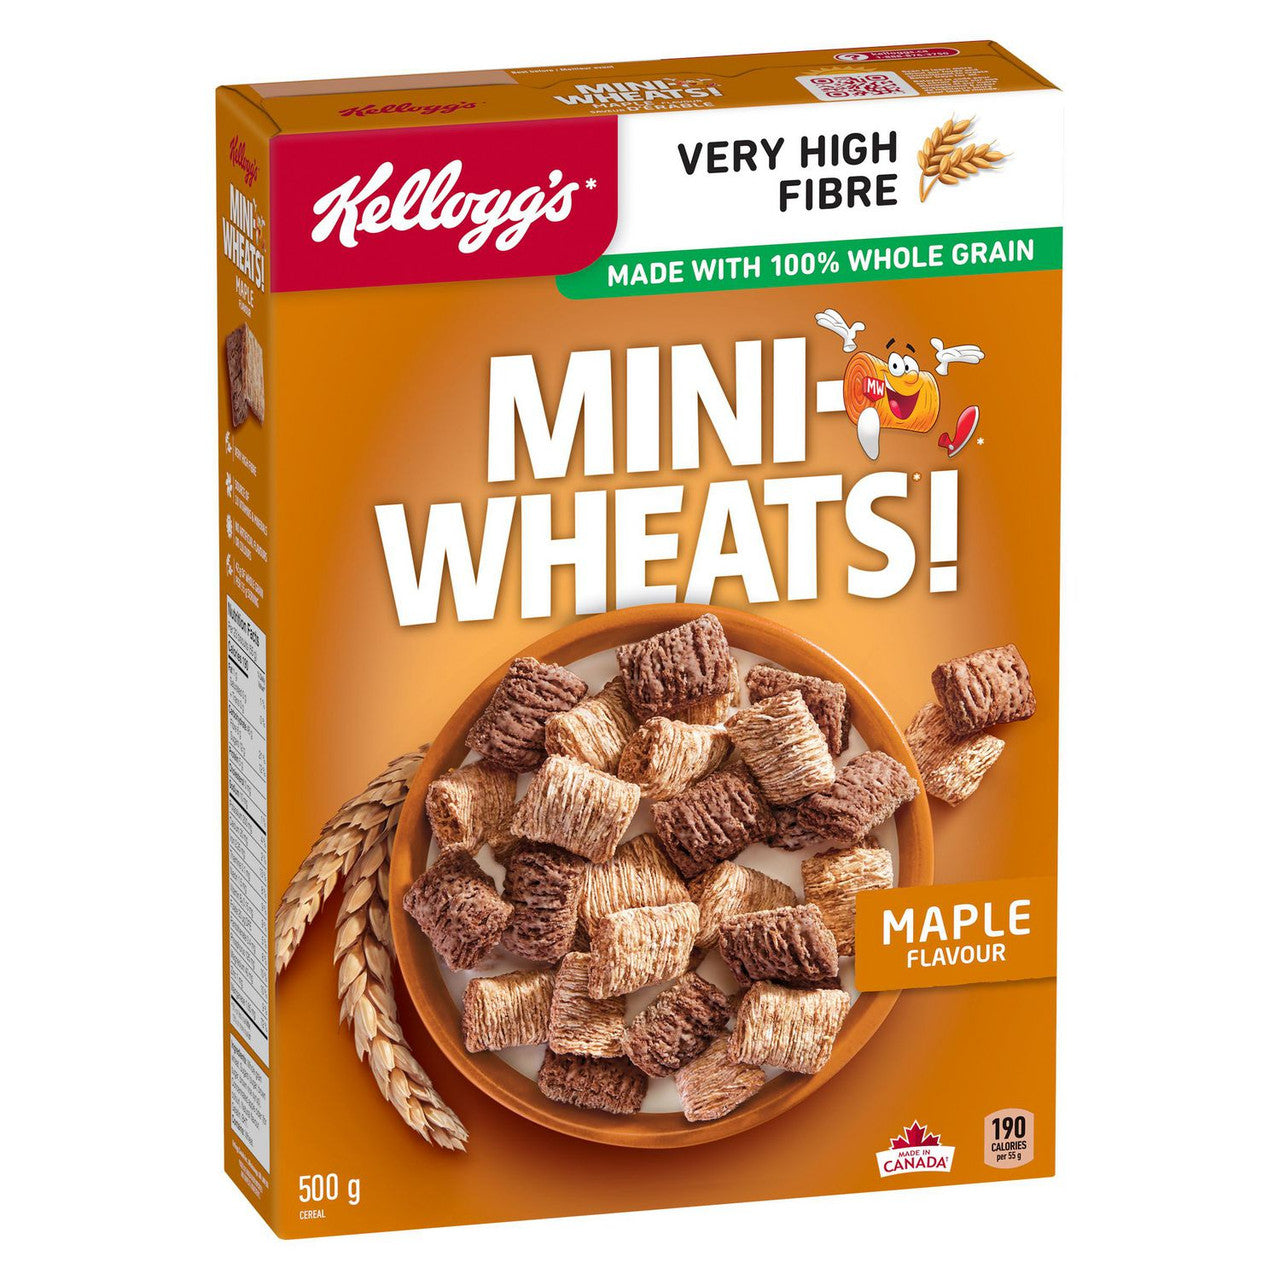 Kellogg's Mini-Wheats Maple Flavour Cereal 500g/17.6oz (Imported from Canada)